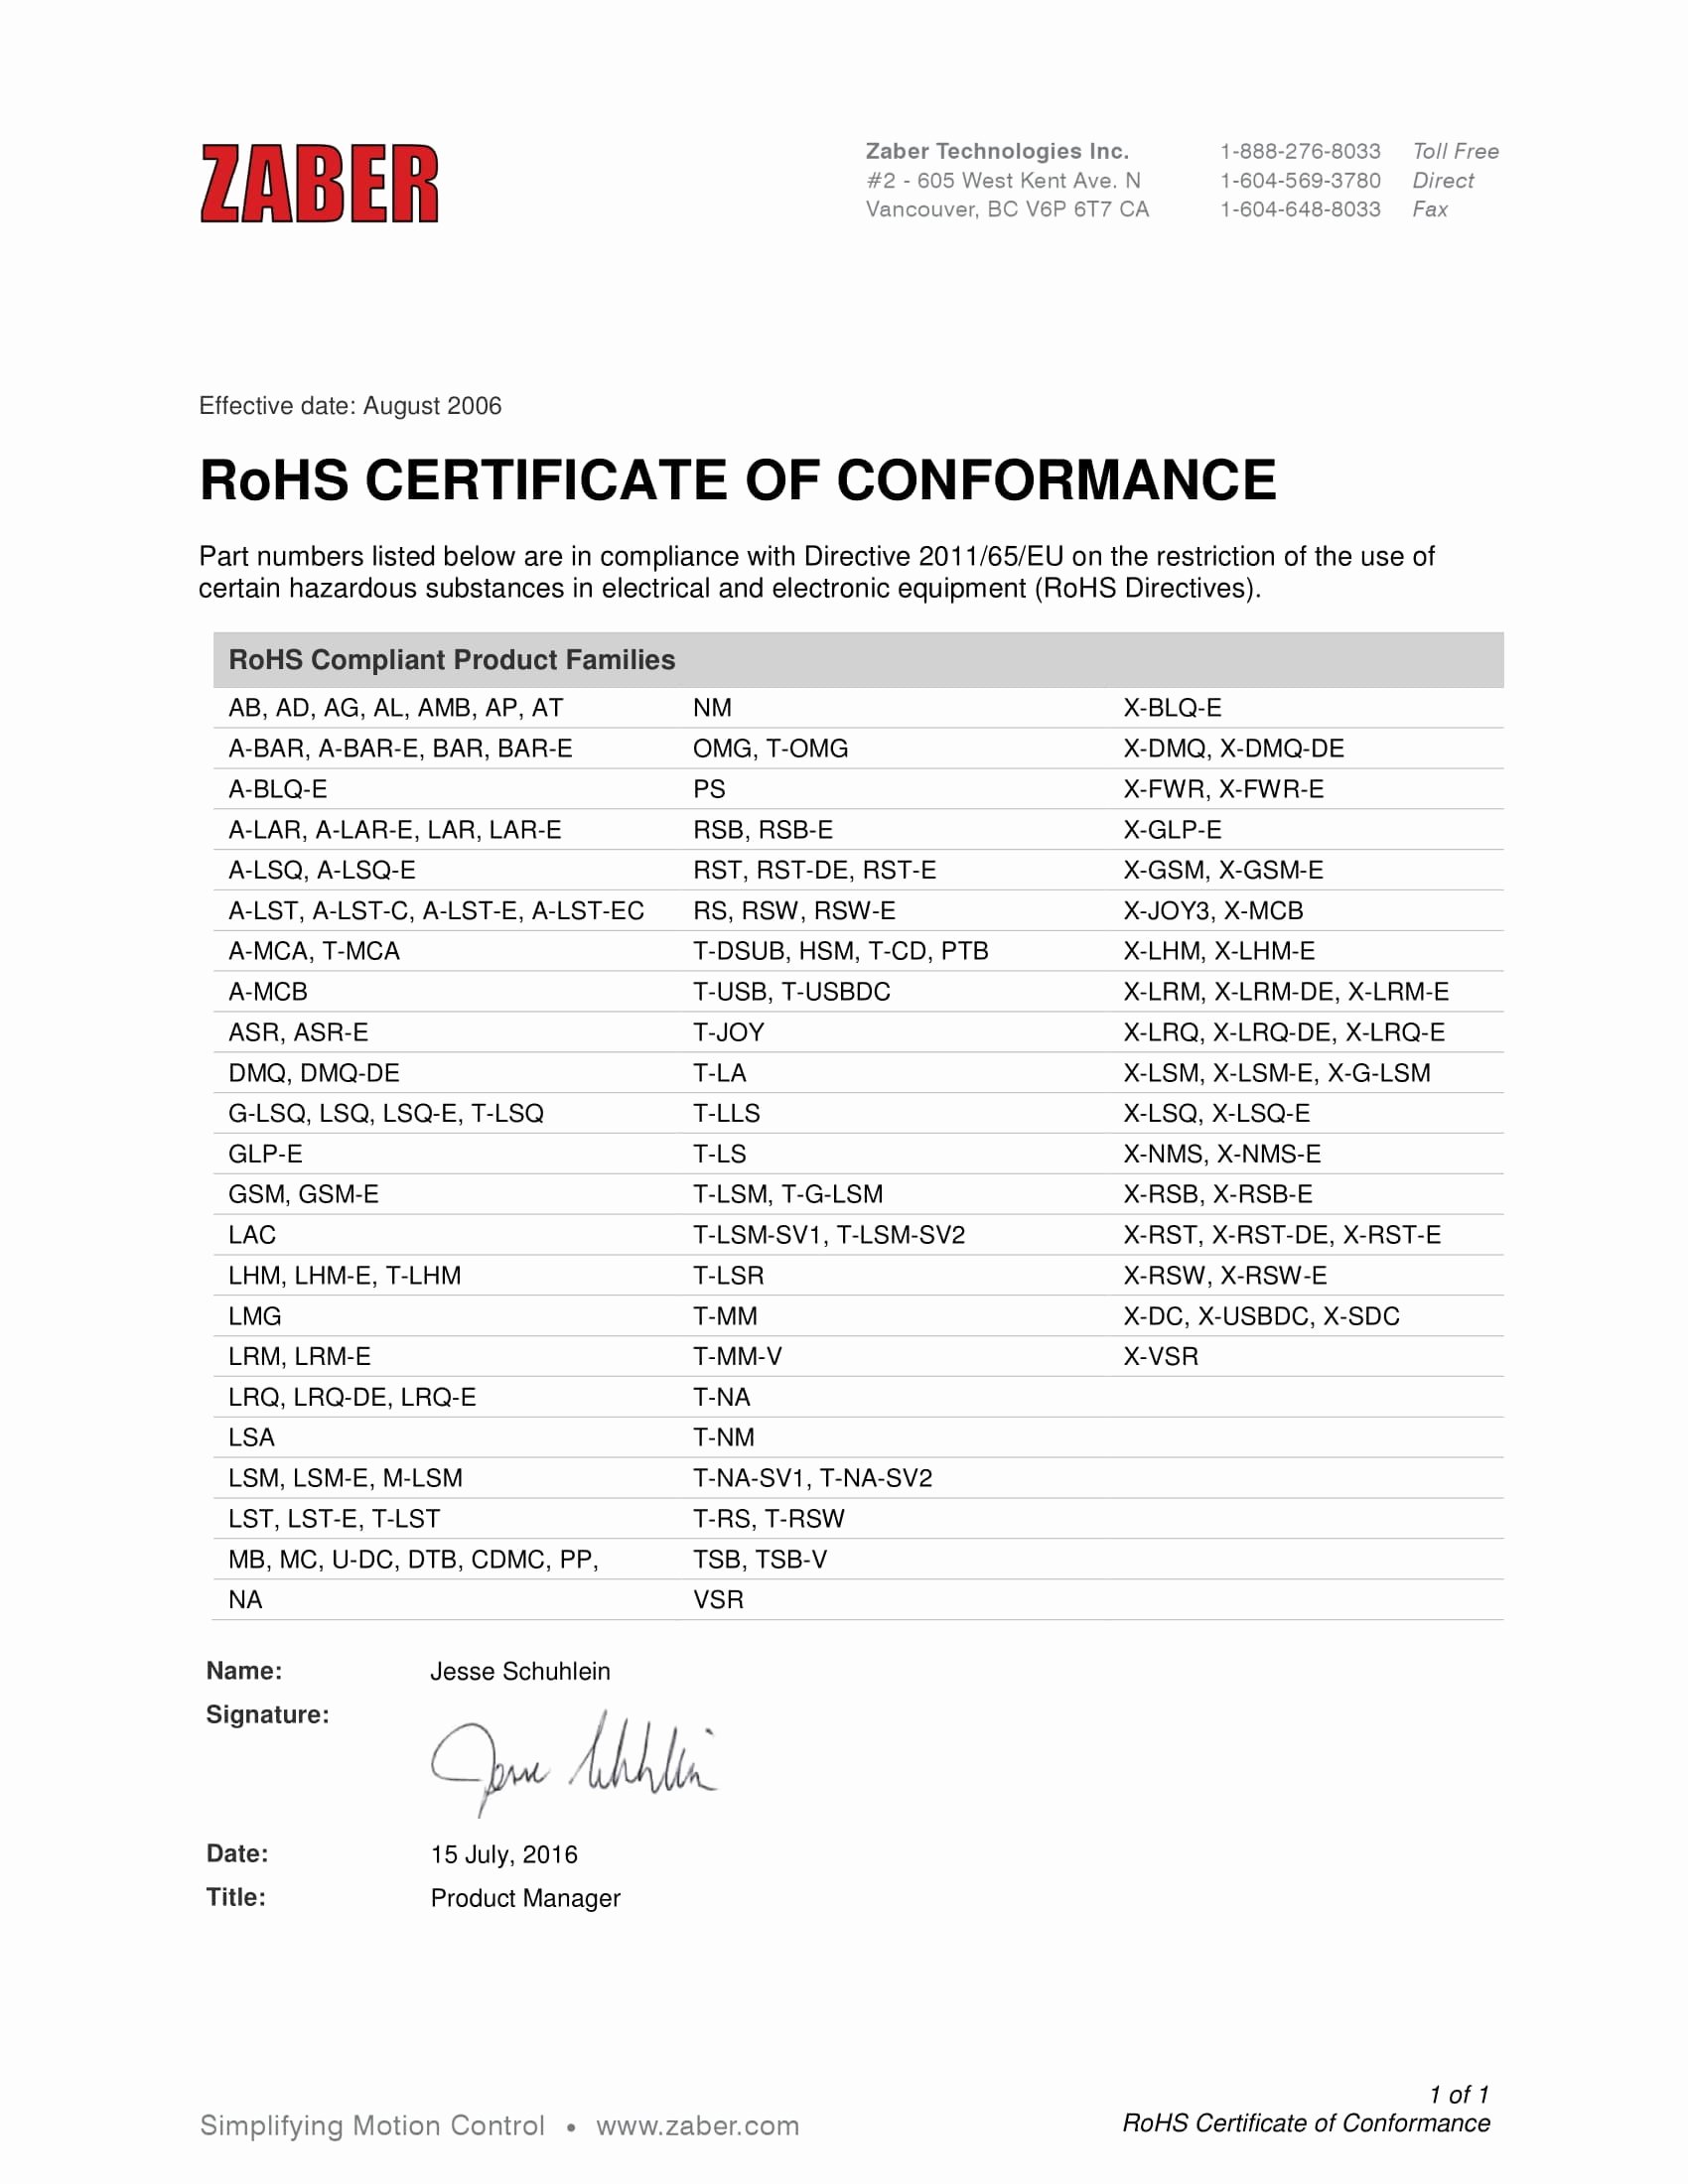 Certificate Of Conformance Template Word Best Of 16 Certificate Of Conformance Example Pdf Word Ai